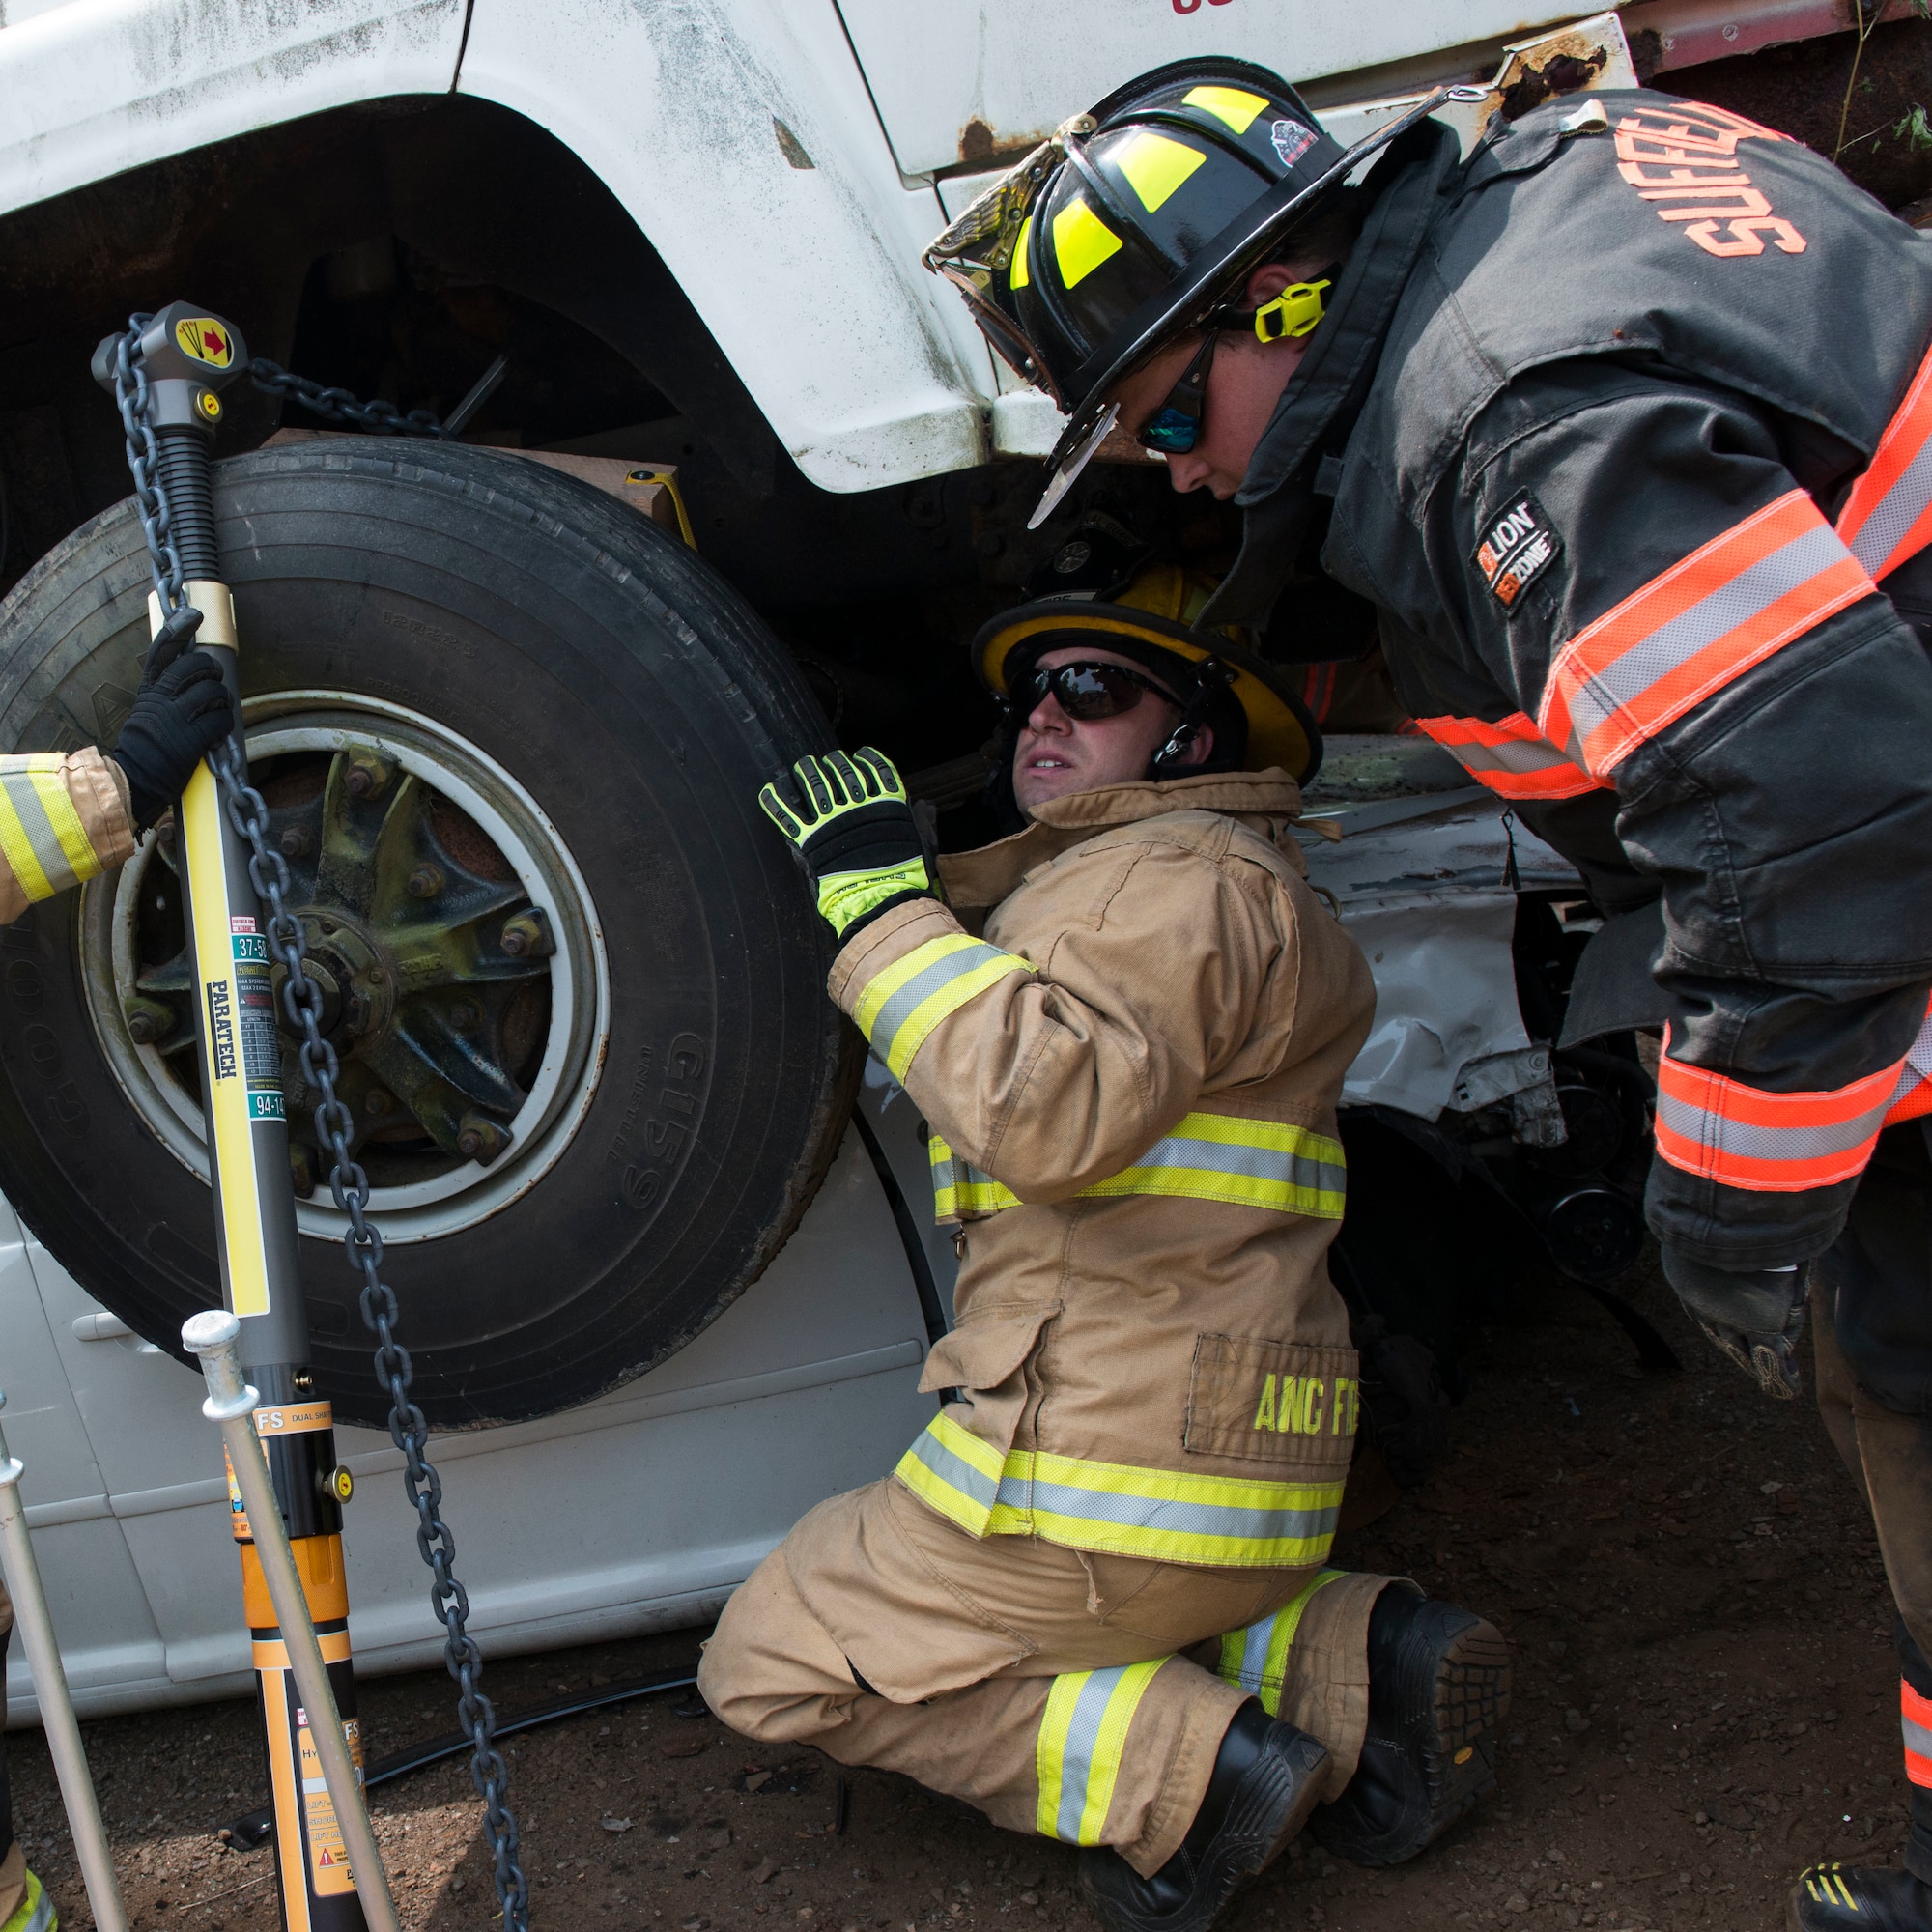 Firefighters assigned to the 103rd Civil Engineer Squadron work alongside firefighters from various other departments to remove an oil tanker off of another vehicle as part of an auto accident scenario during a rescue strike team exercise, June 1, 2019 in East Granby, Conn. The firefighters trained with members of several local fire departments to ensure continuity in training across departments. (U.S. Air National Guard photo by Tech. Sgt. Tamara R. Dabney)